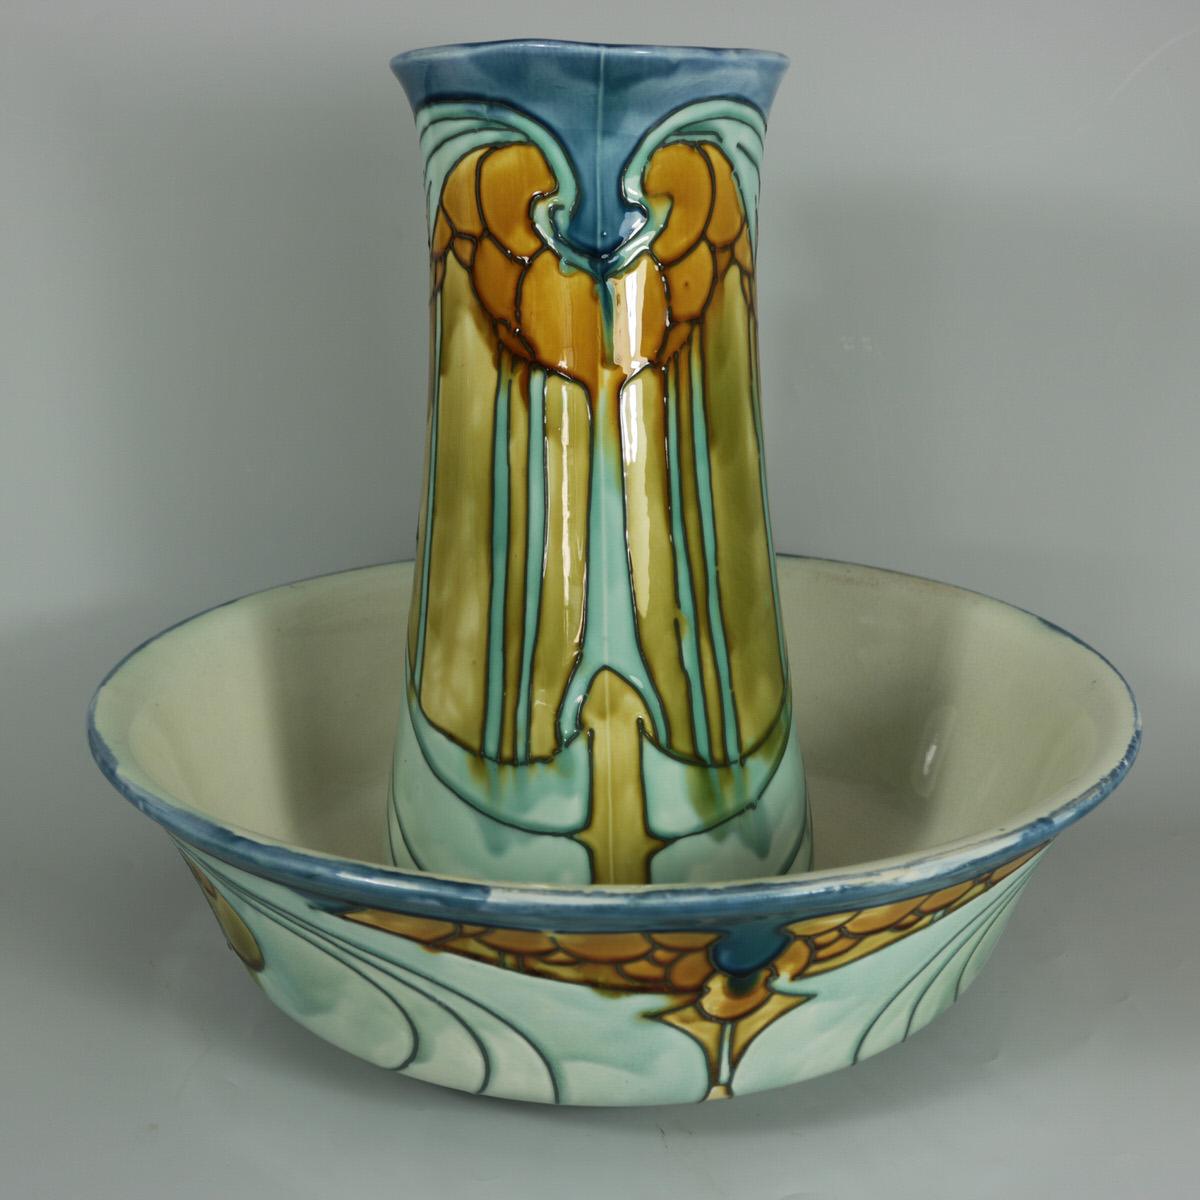 Minton Secessionist No.8 jug and wash bowl. Decorated in shades of blue, orange and green. Grey tube lined art nouveau stylized motifs. Cream interior to both. Maker's marks, including impressed 'MINTONS' mark, printed 'MINTONS LTD. No.8'. Impressed